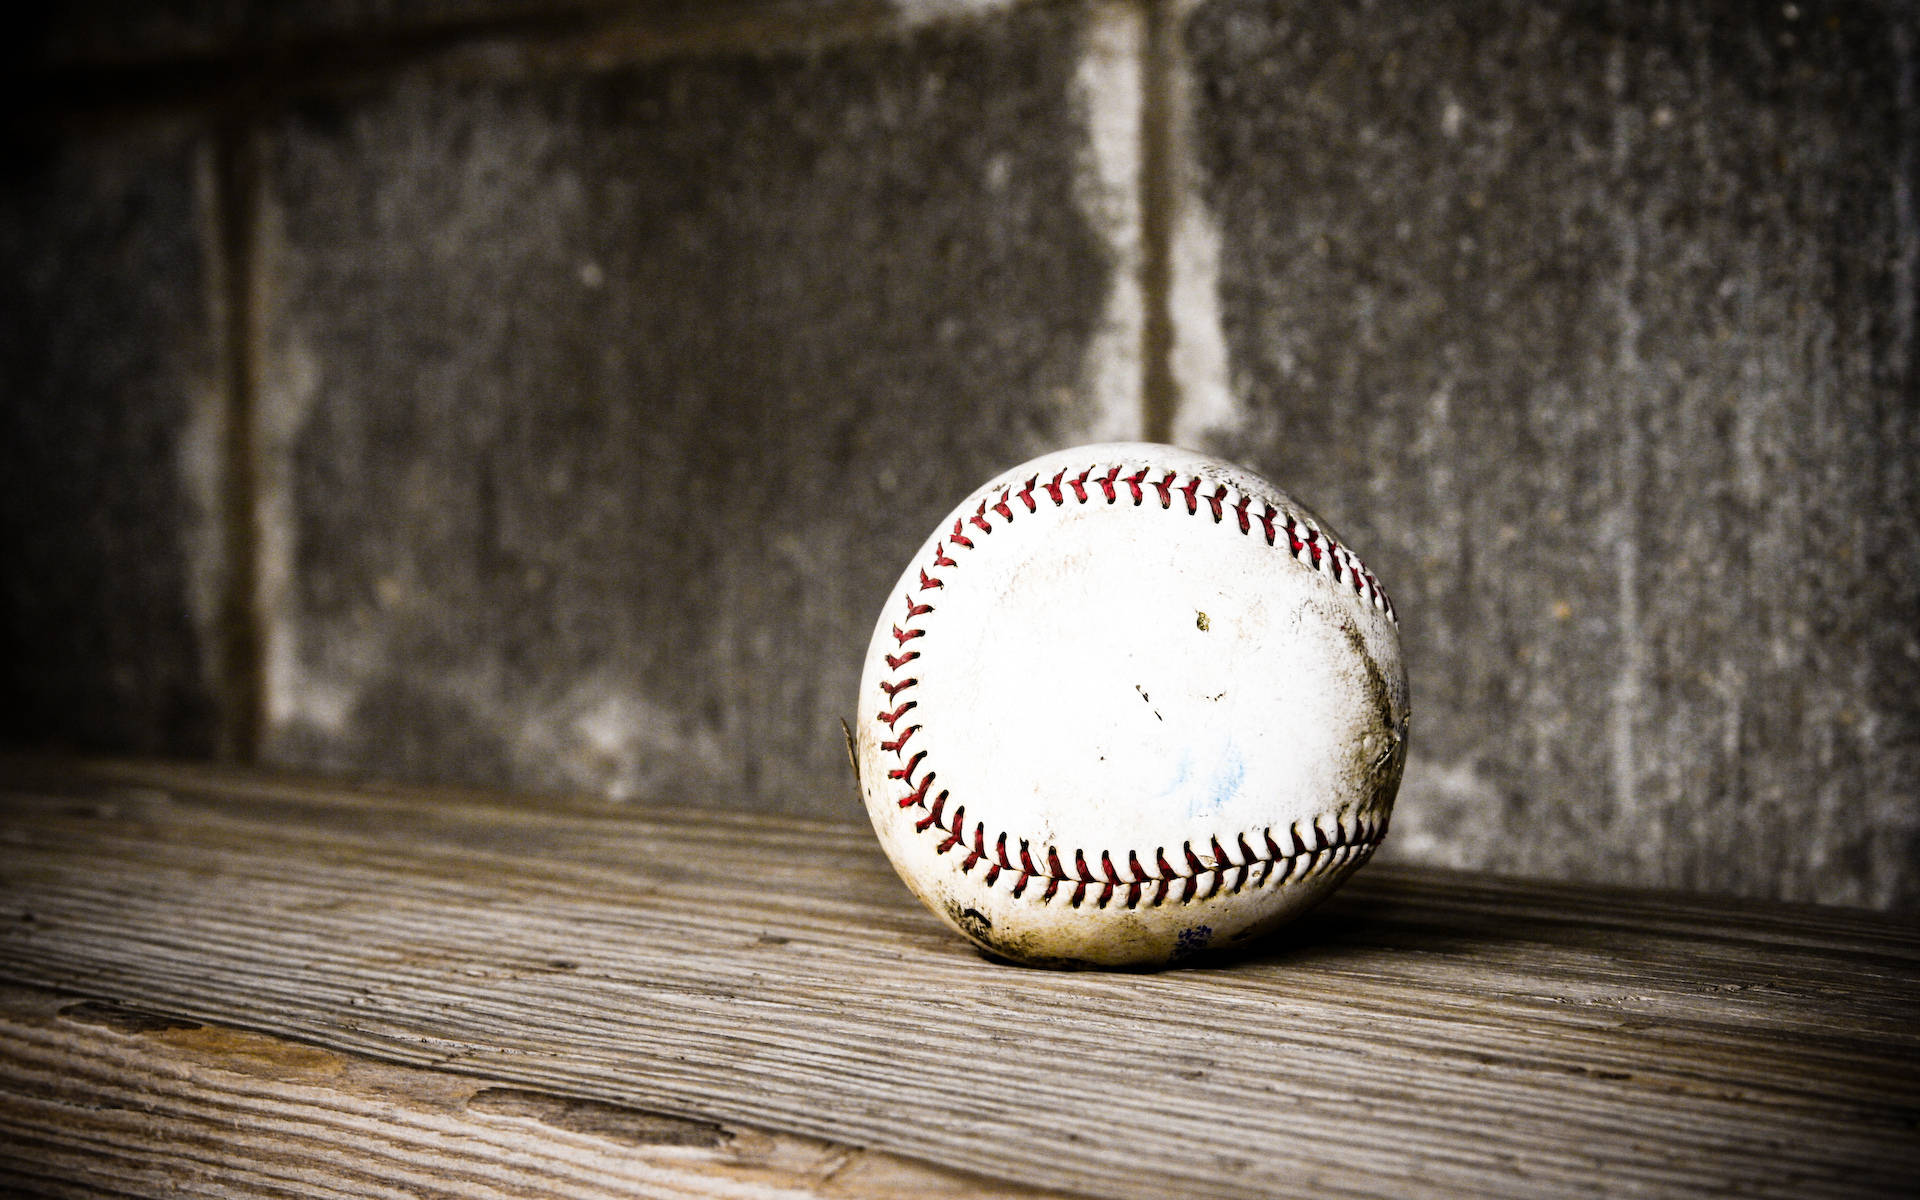 Cool Baseball Ball In Wooden Surface Background